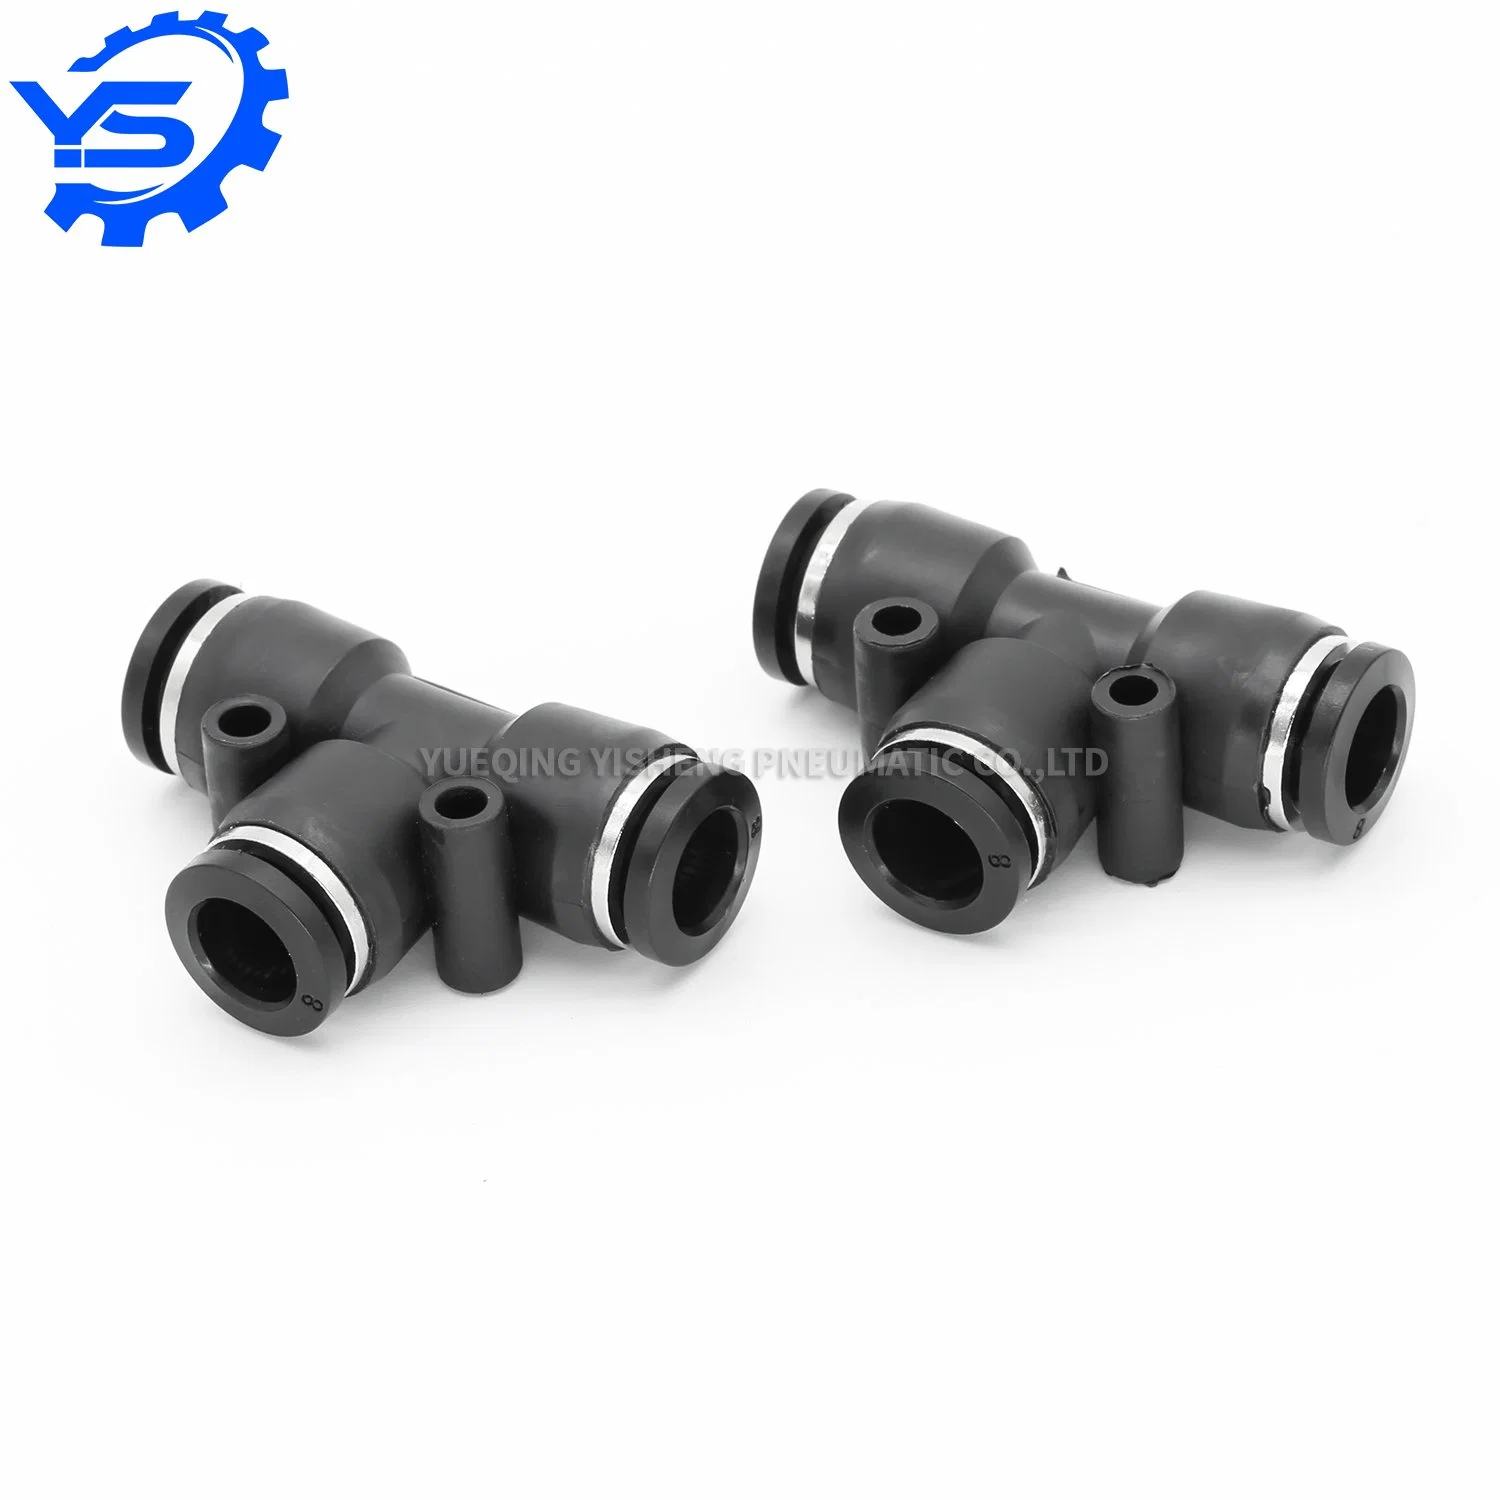 PE-8 Plastic Quick Connect Tee Tube Joints Air Hose Fittings PE Pneumatic Connector Pneumatic Quick Coupling